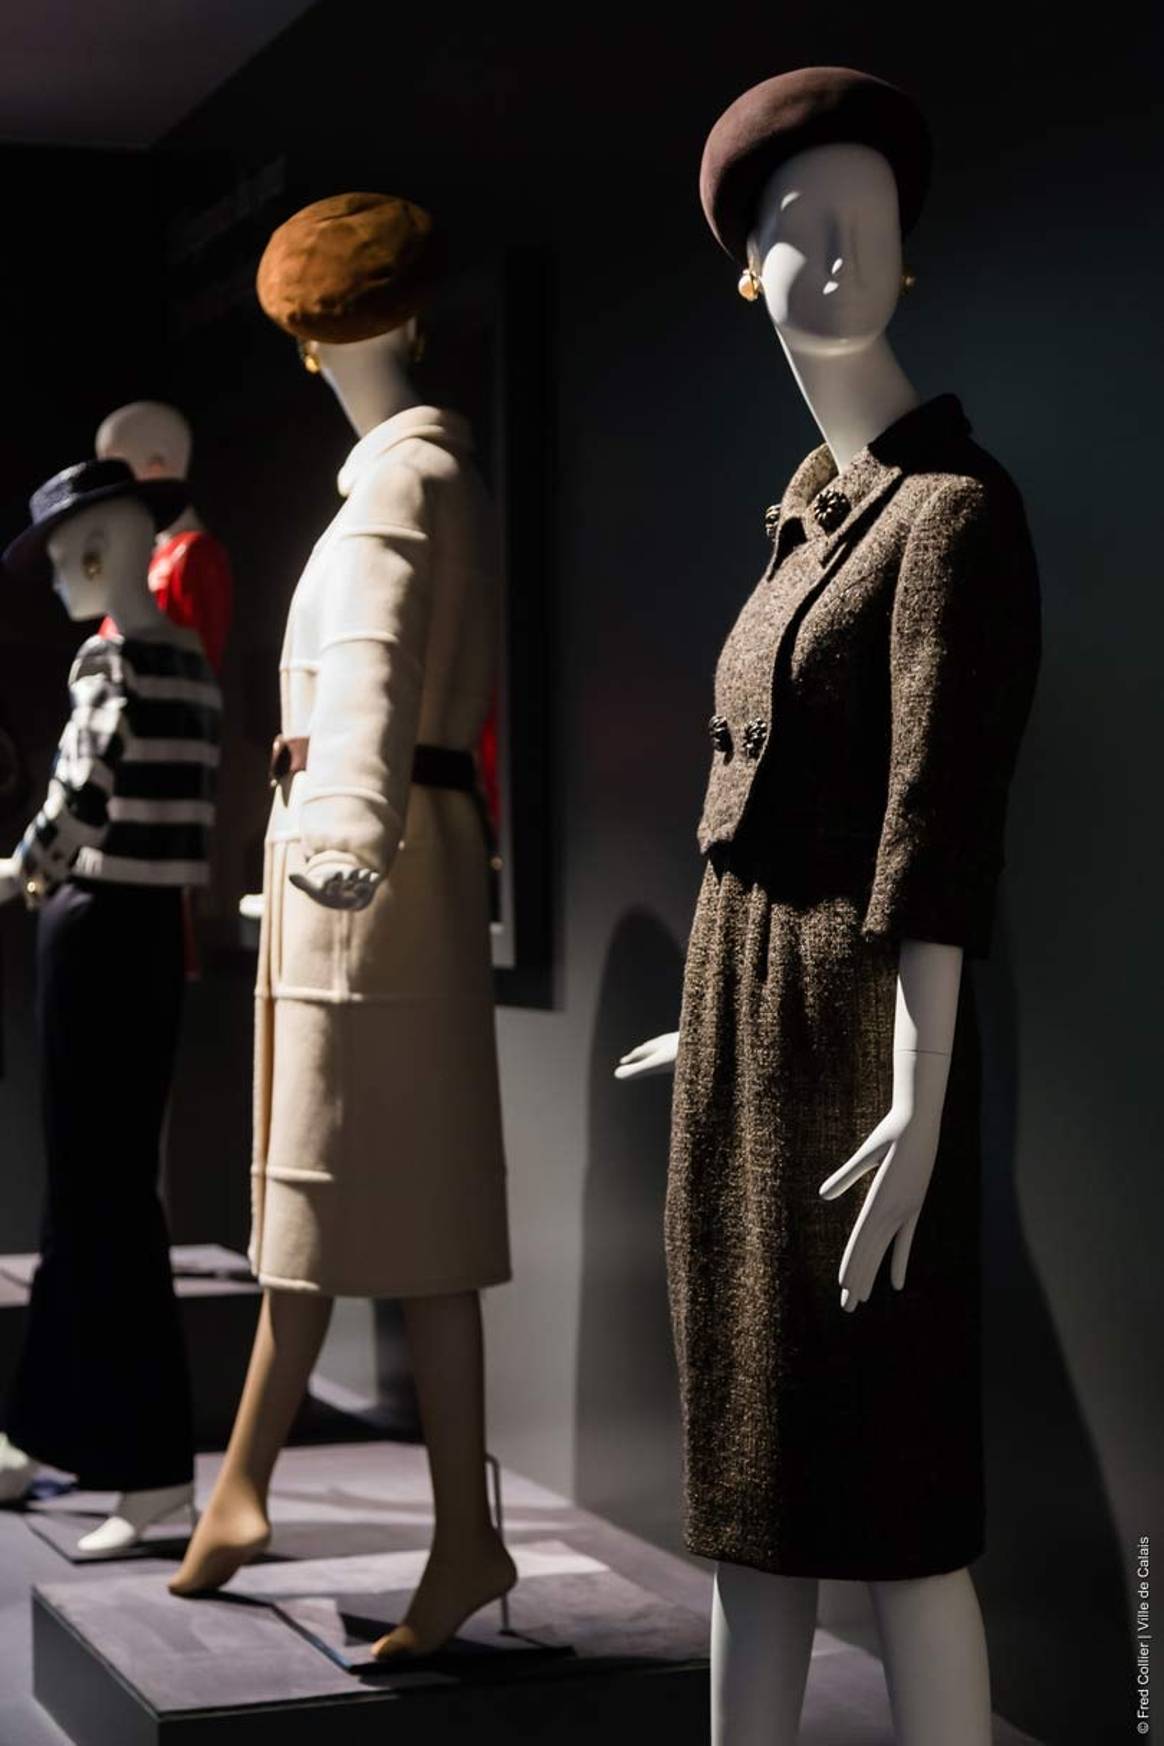 In Pictures: Hubert de Givenchy’s eponymous exhibition